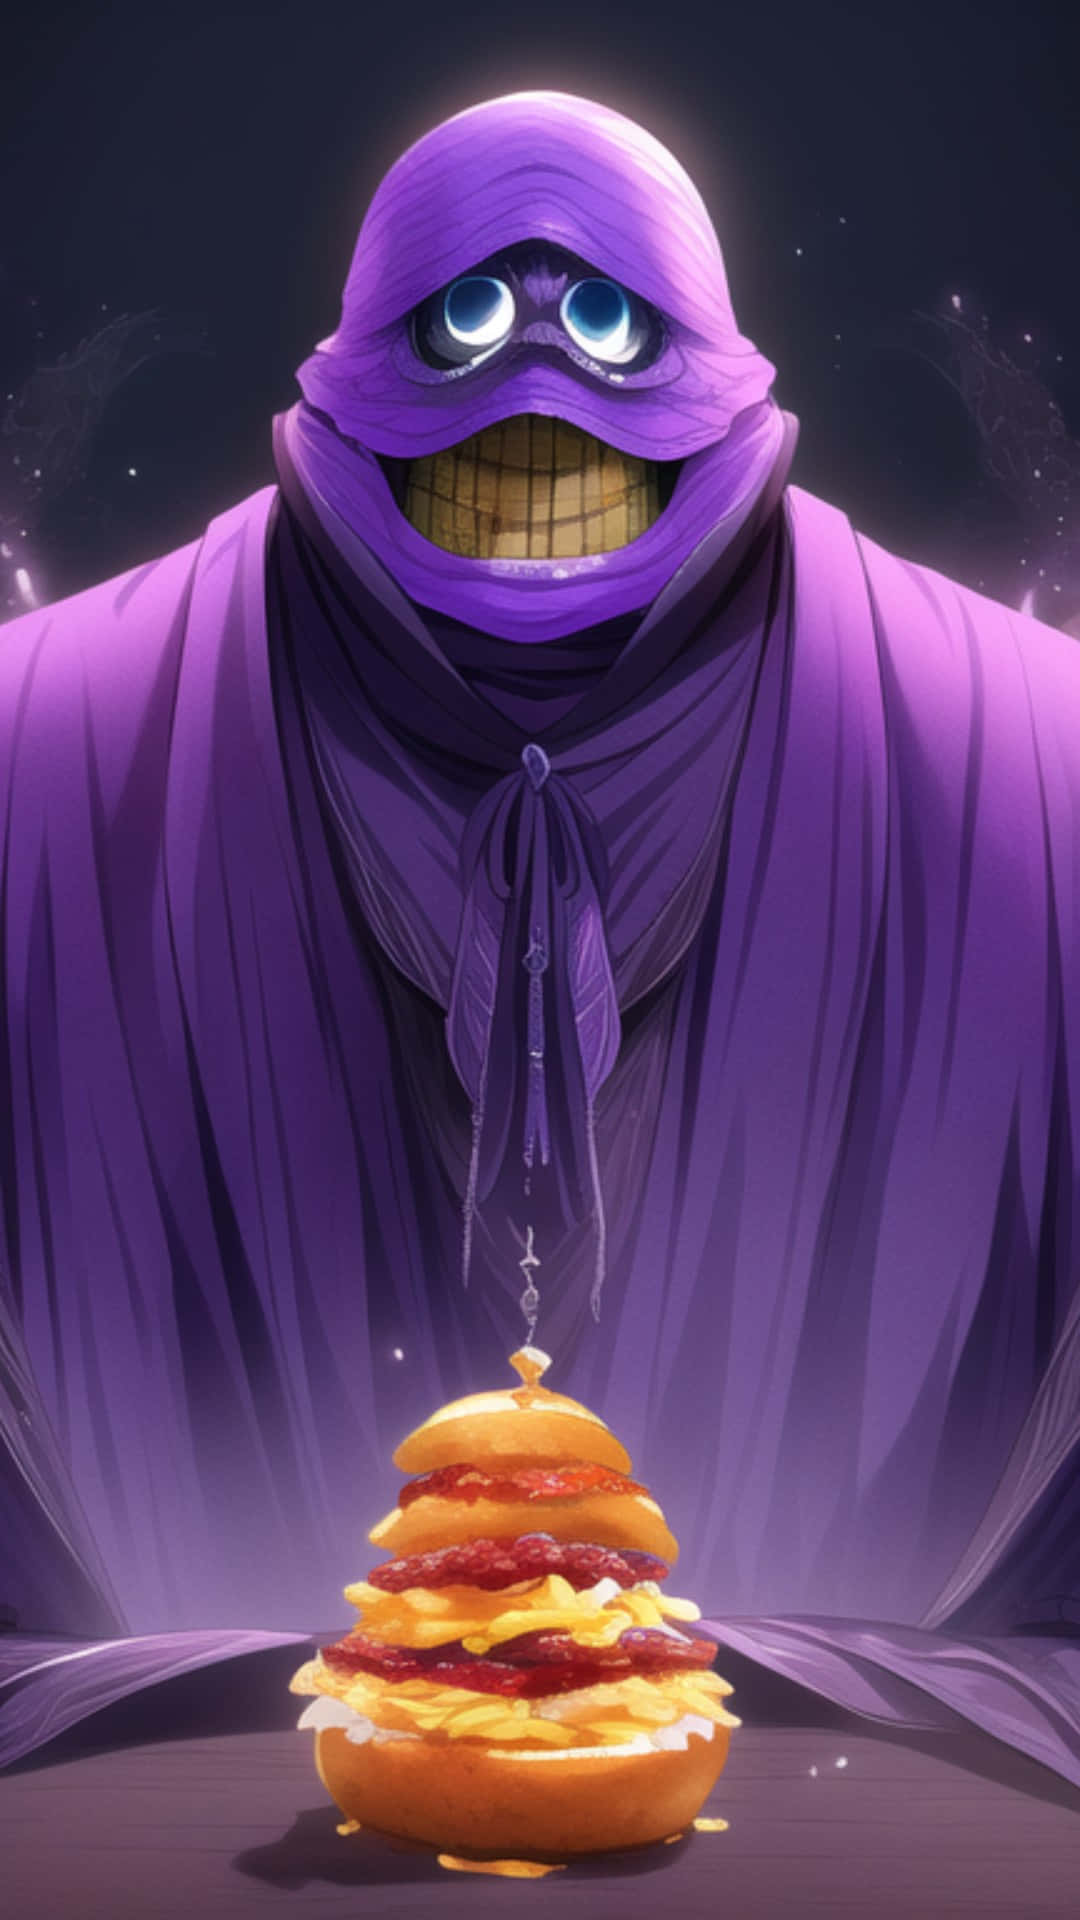 Purple Cloaked Figurewith Burger Background